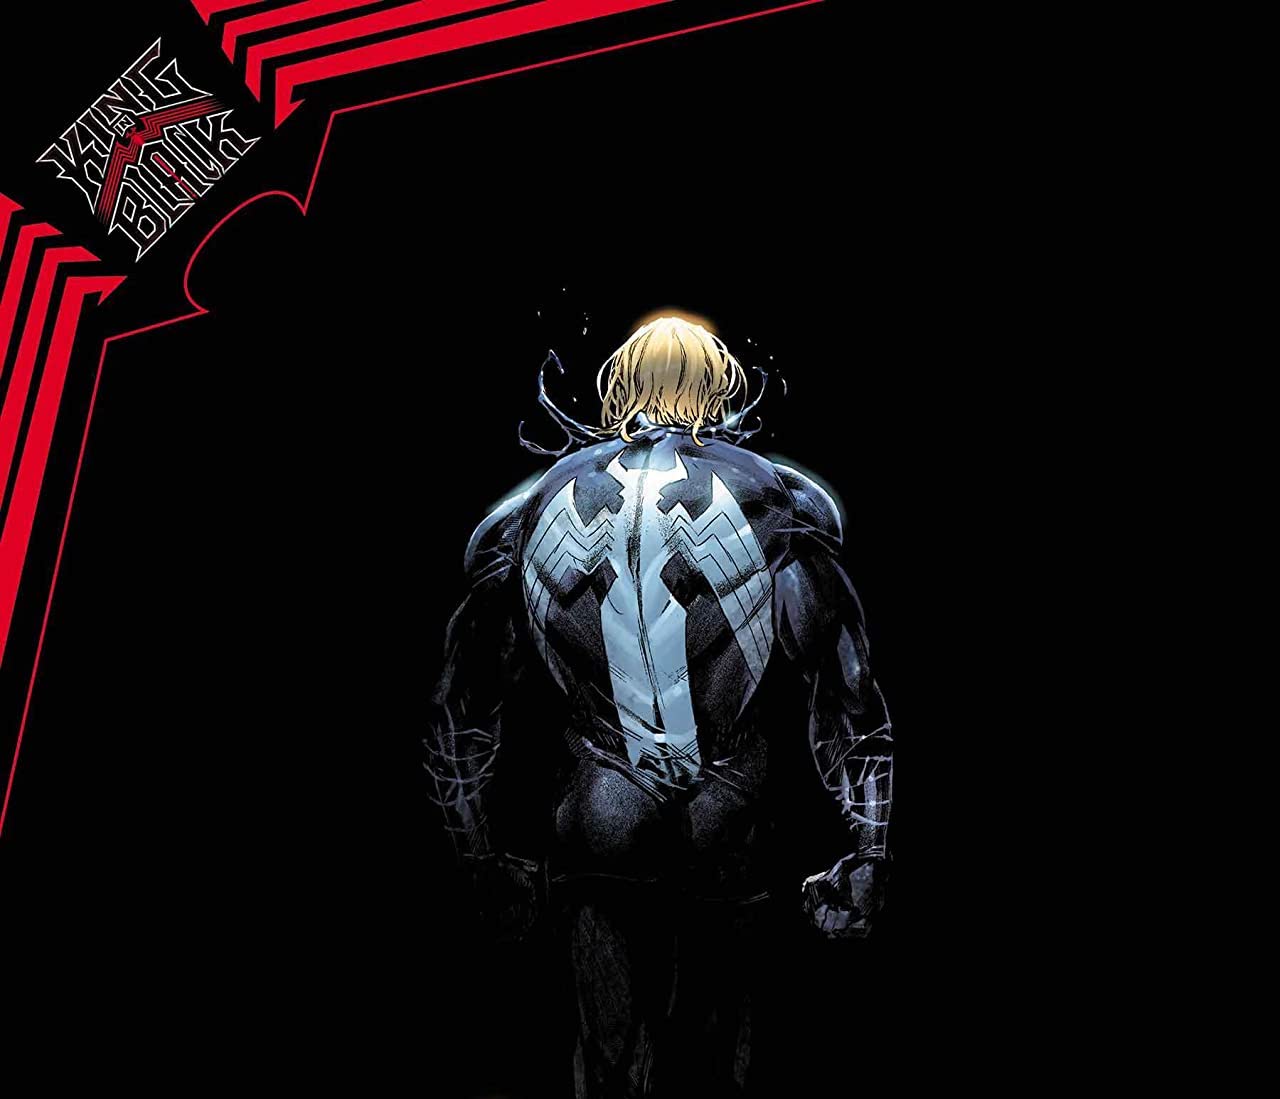 'Venom' #34 explores what it means to die when wearing a Symbiote